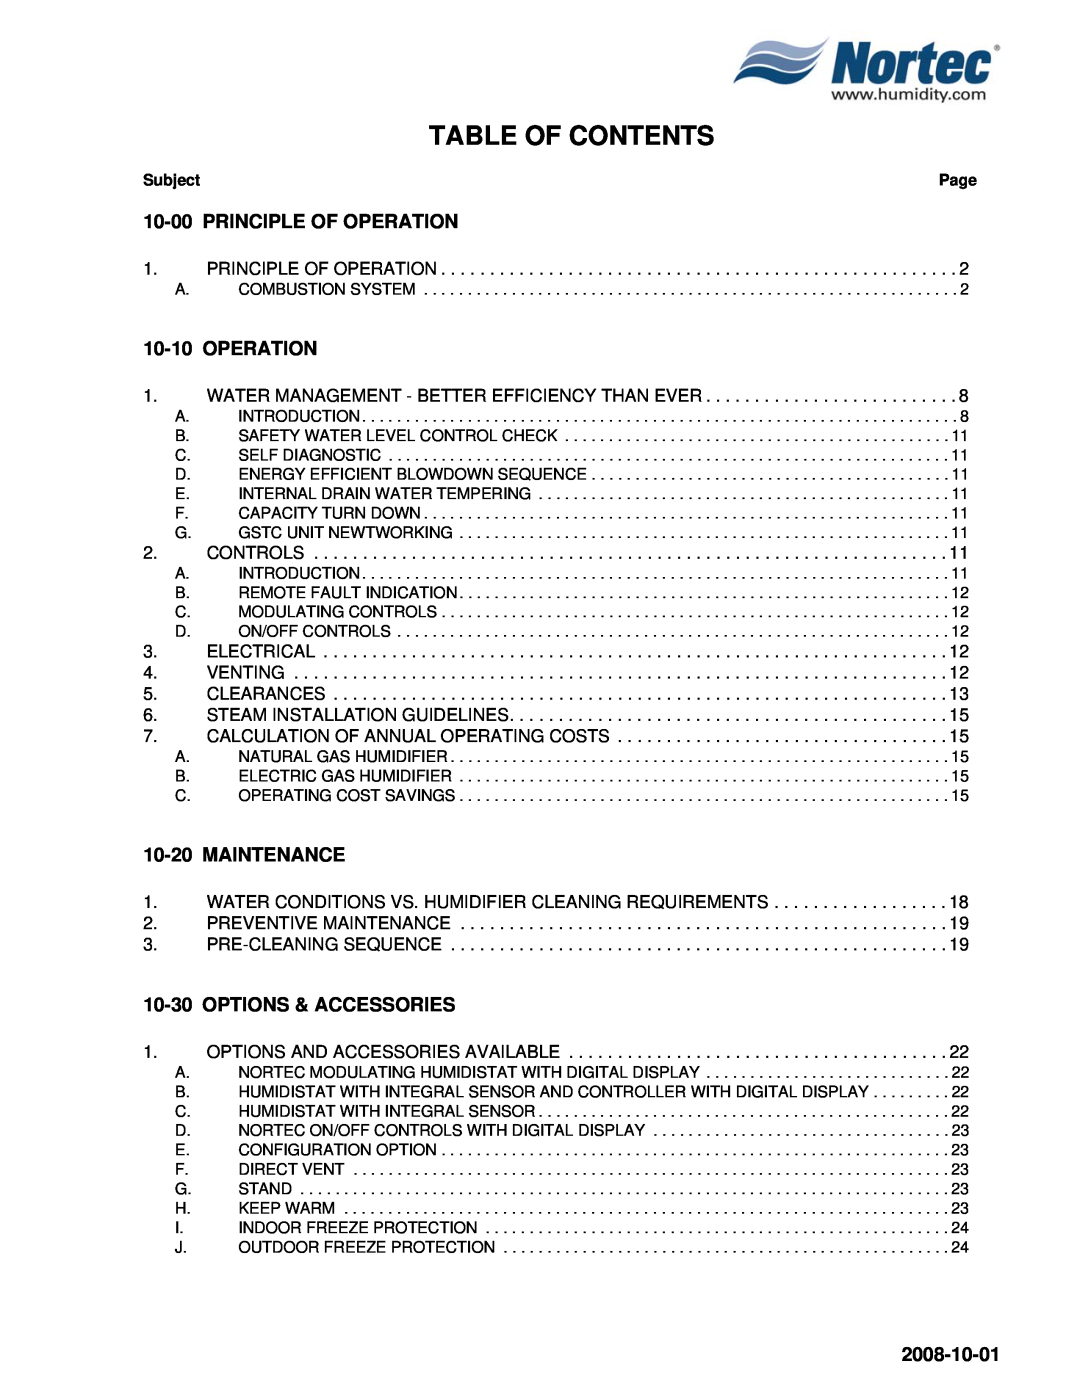 Nortec Industries GSTC Outdoor manual Table Of Contents, 10-00PRINCIPLE OF OPERATION, 10-10OPERATION, 10-20MAINTENANCE 